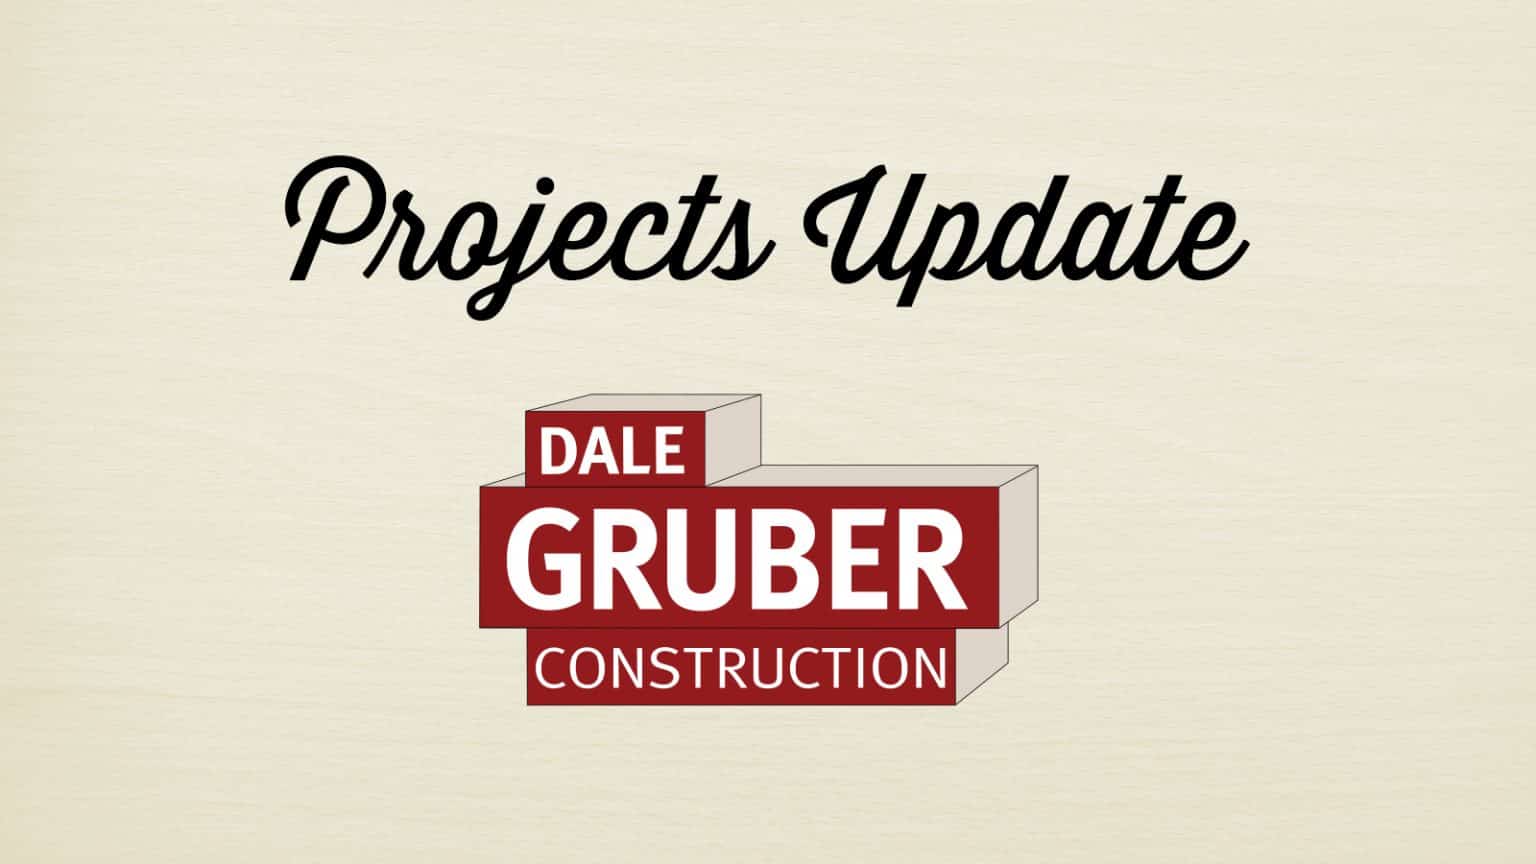 Projects update